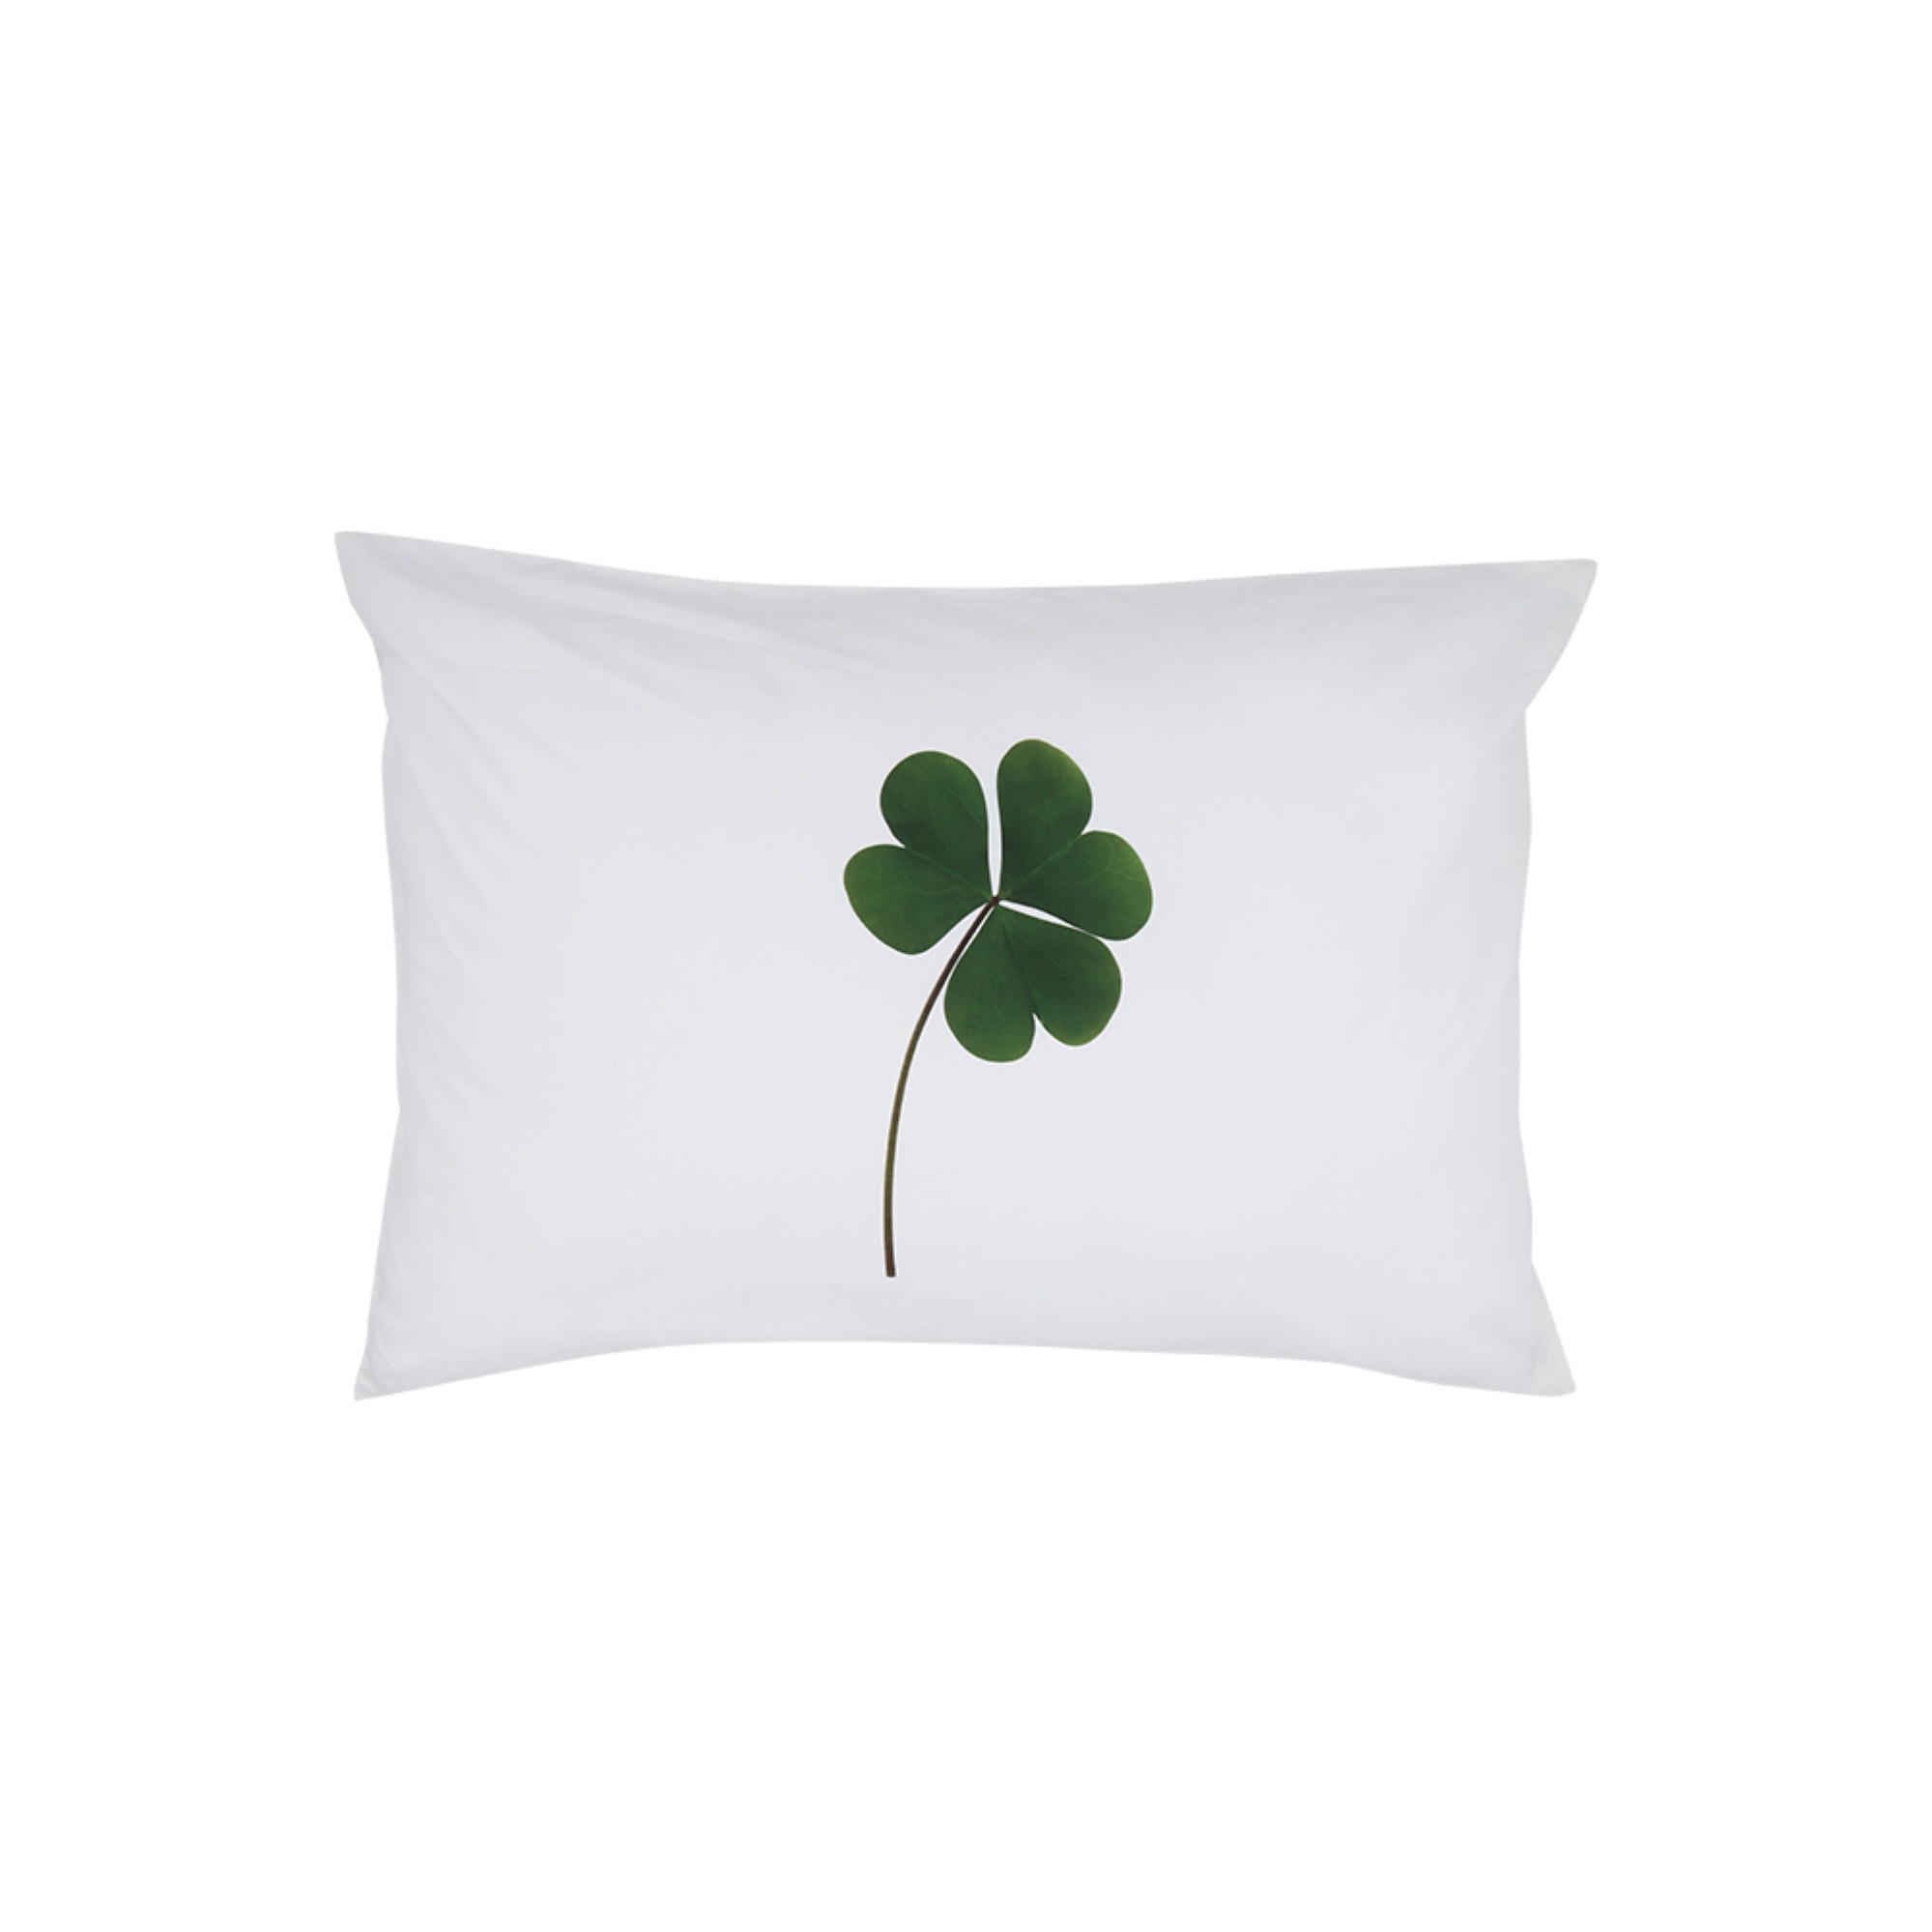 KNOW WAVE X 39 ETC LUCKY CHARM PILLOW COVER KNA029u(WHITE)